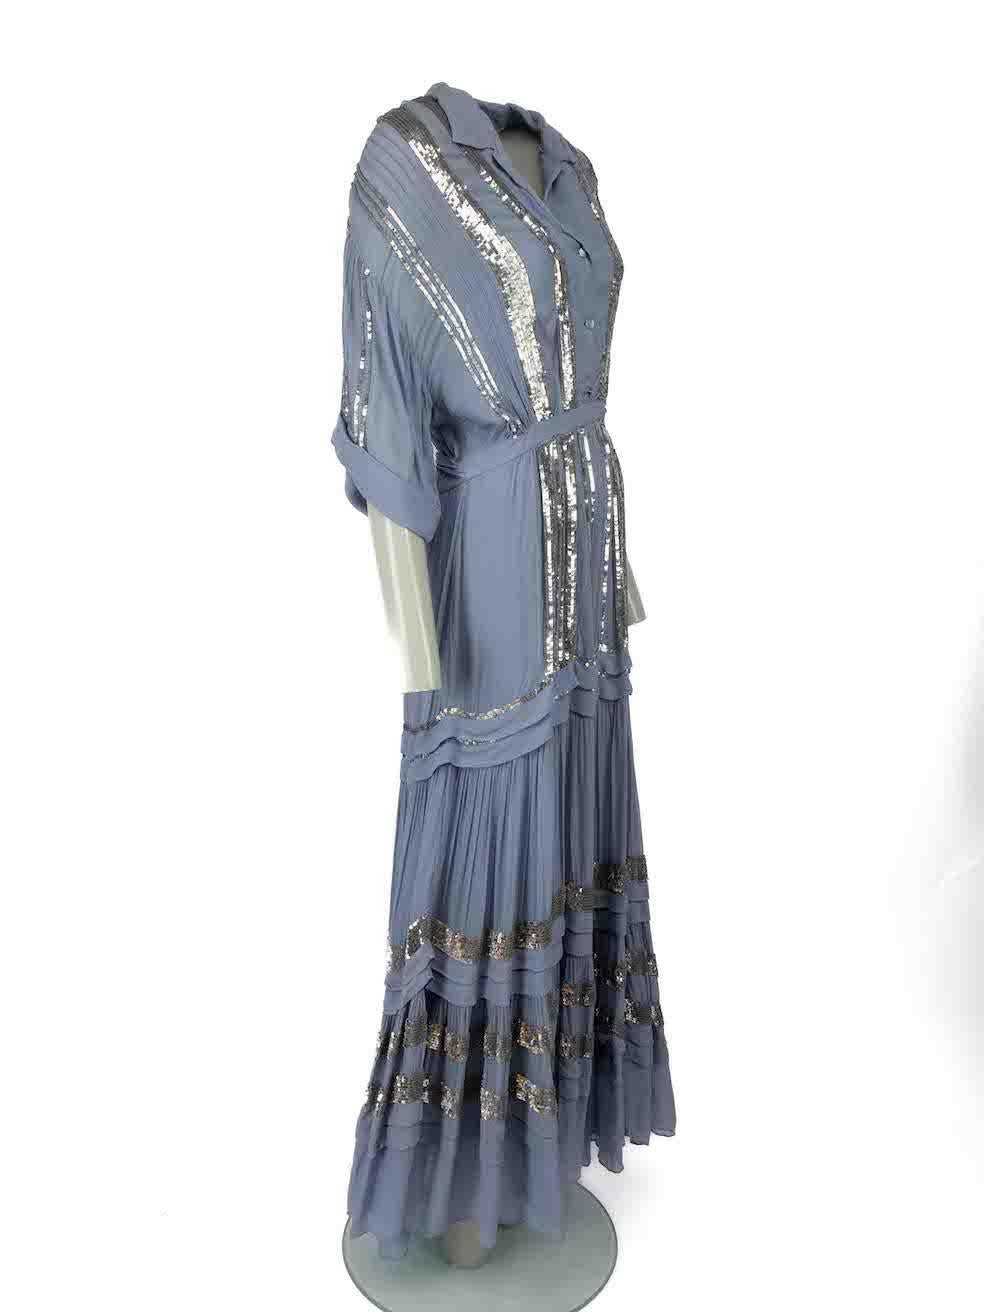 CONDITION is Never worn, with tags. Tags are still attached however a number of very small thread pulls can be found throughout on this new Temperley London designer resale item.
 
Details
Blue
Viscose
Dress
Maxi
Silver sequinned
V-neck
Button up